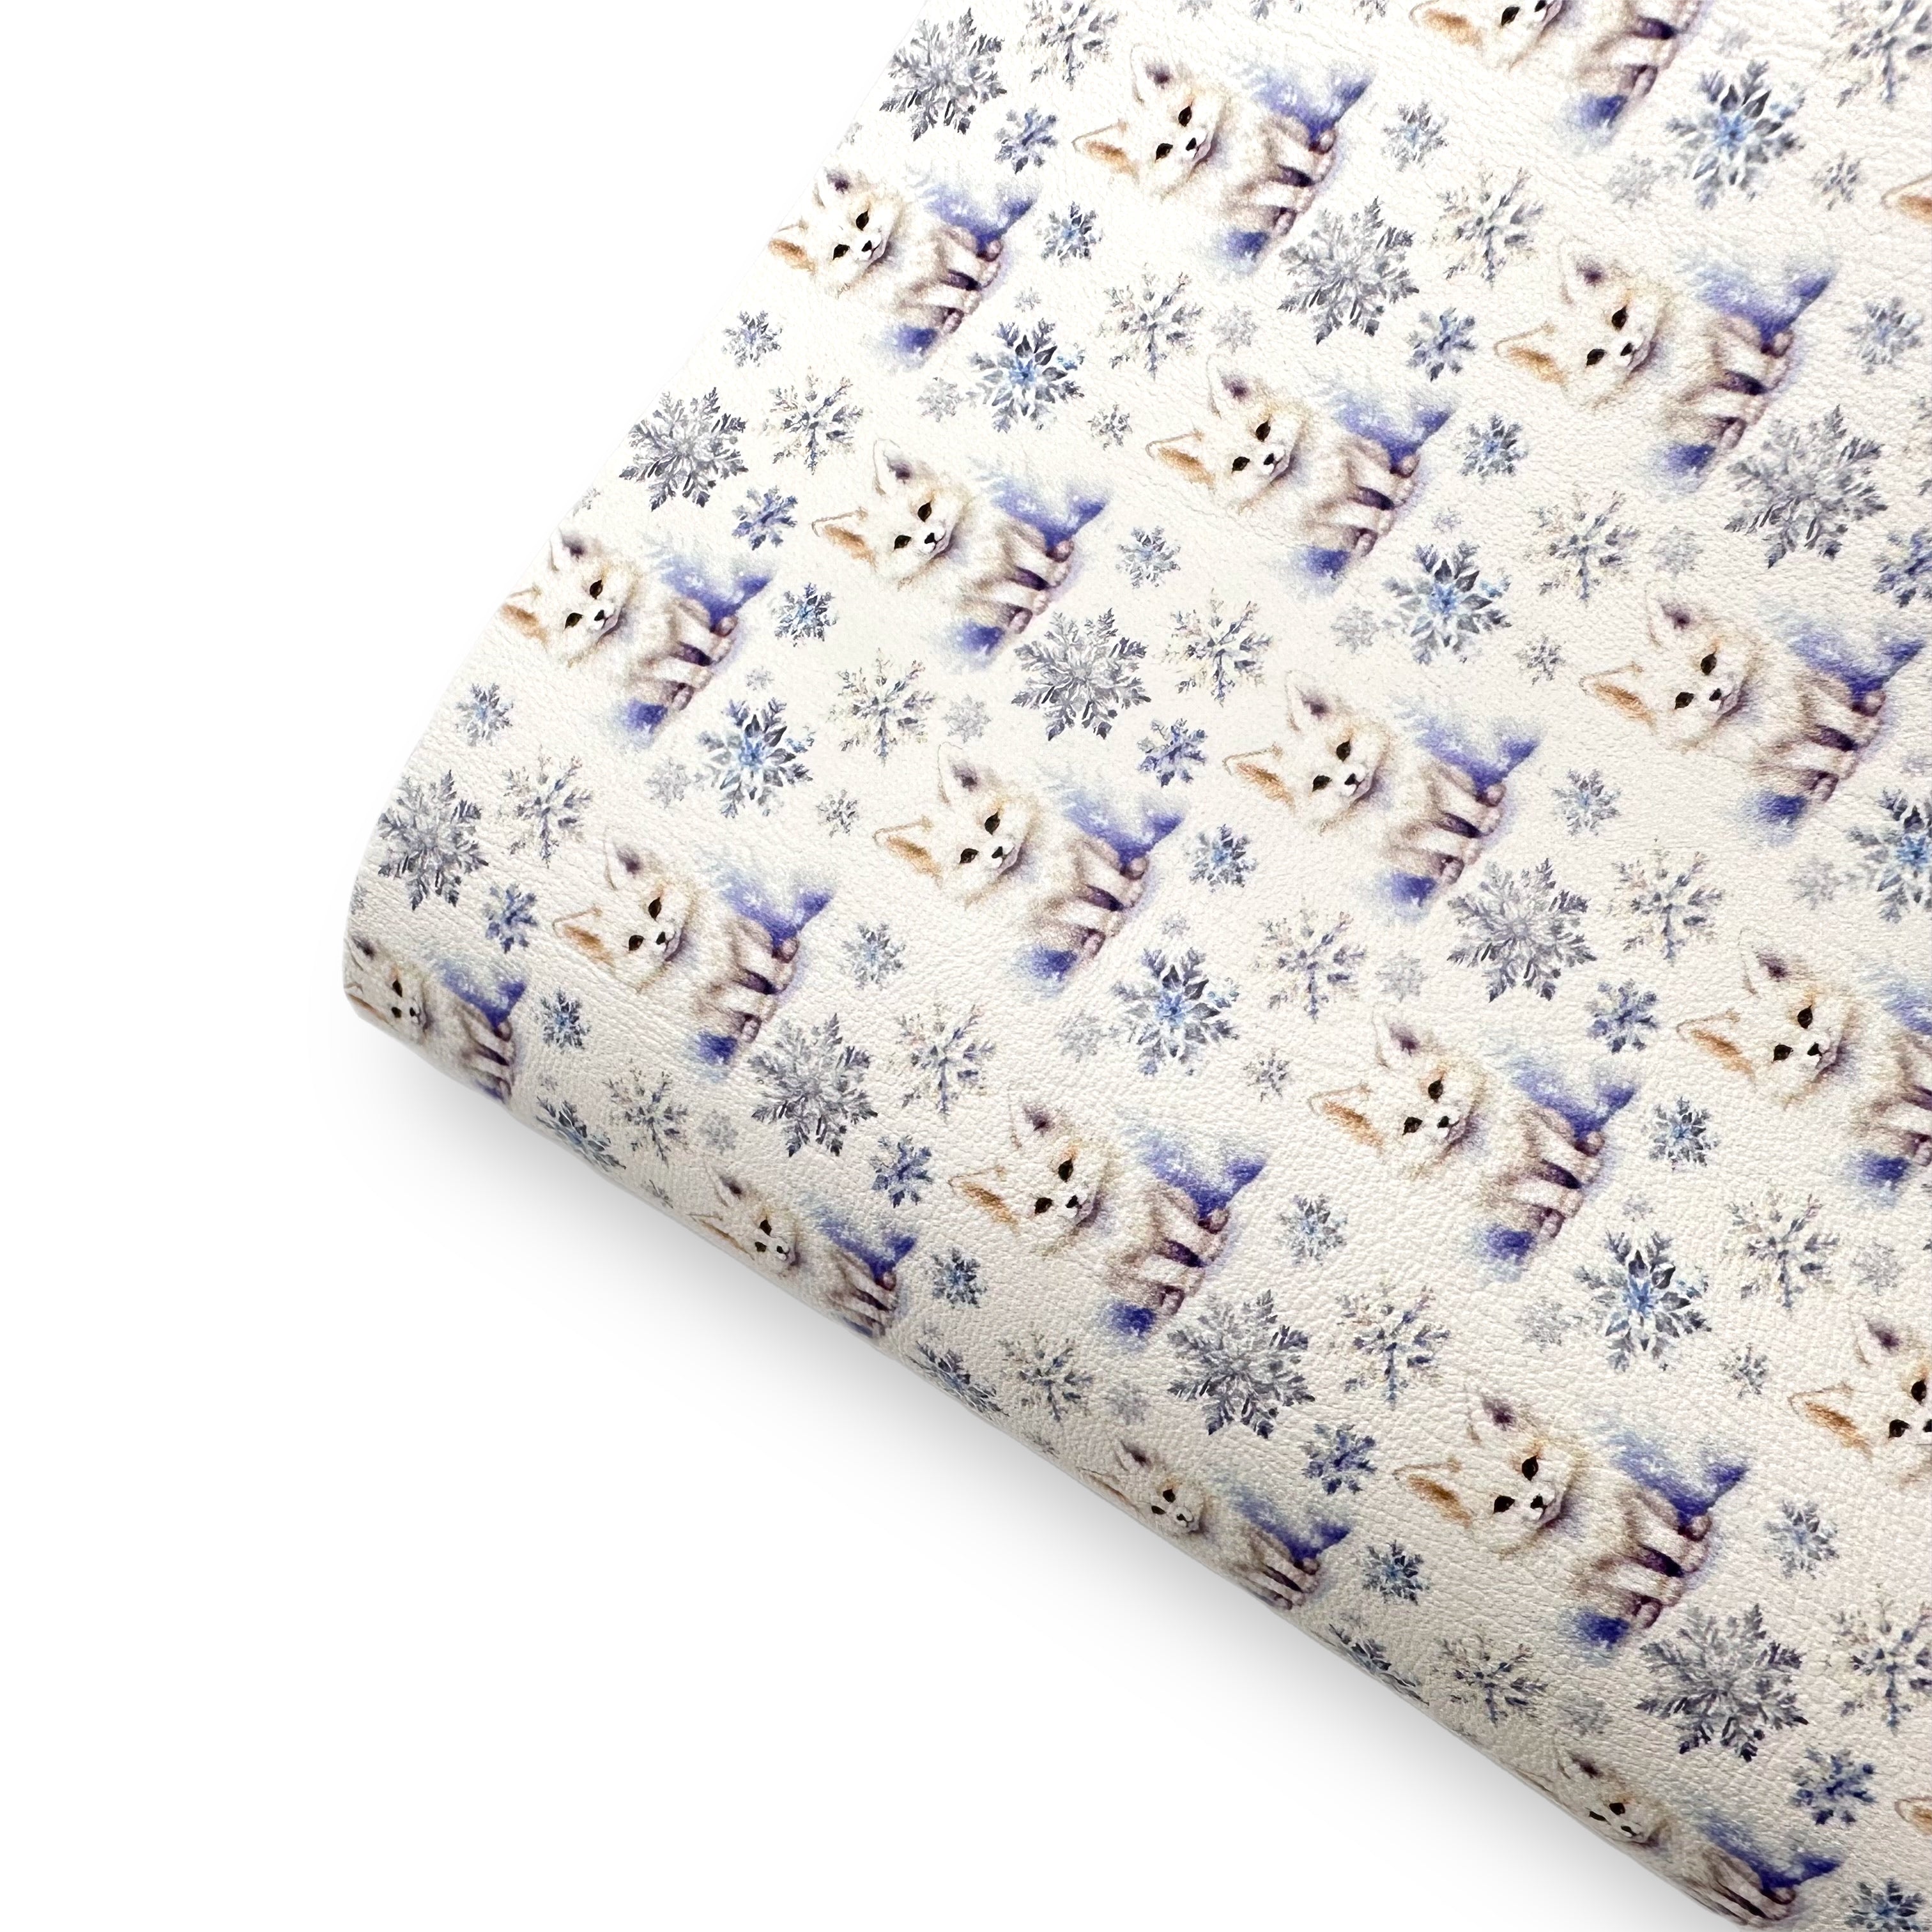 Snowy Fox Premium Faux Leather Fabric Sheets